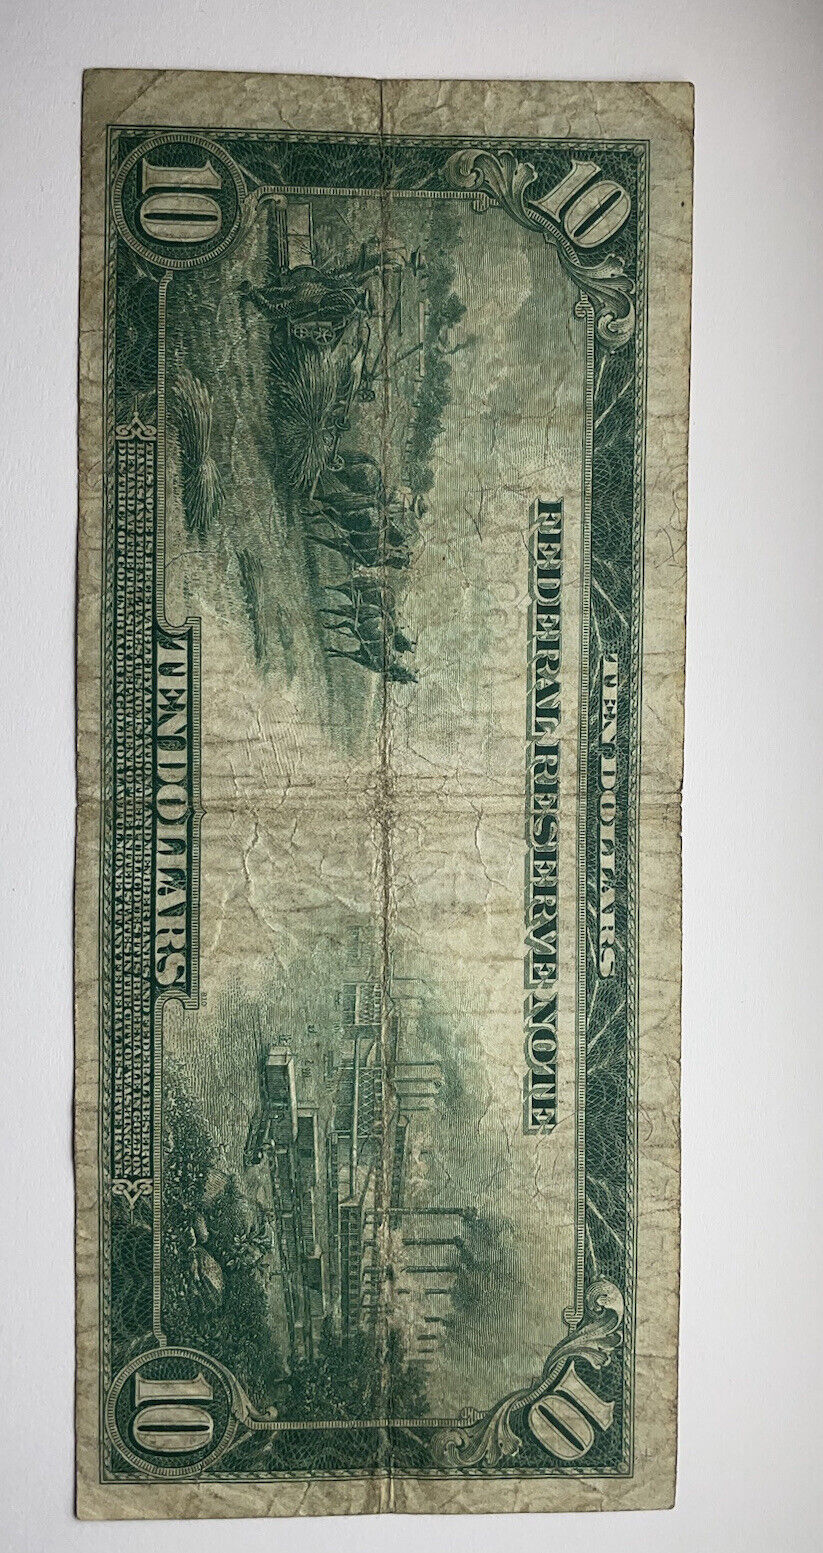 $10 1914 Federal Reserve Note Boston MA Fine no holes or rips collectible